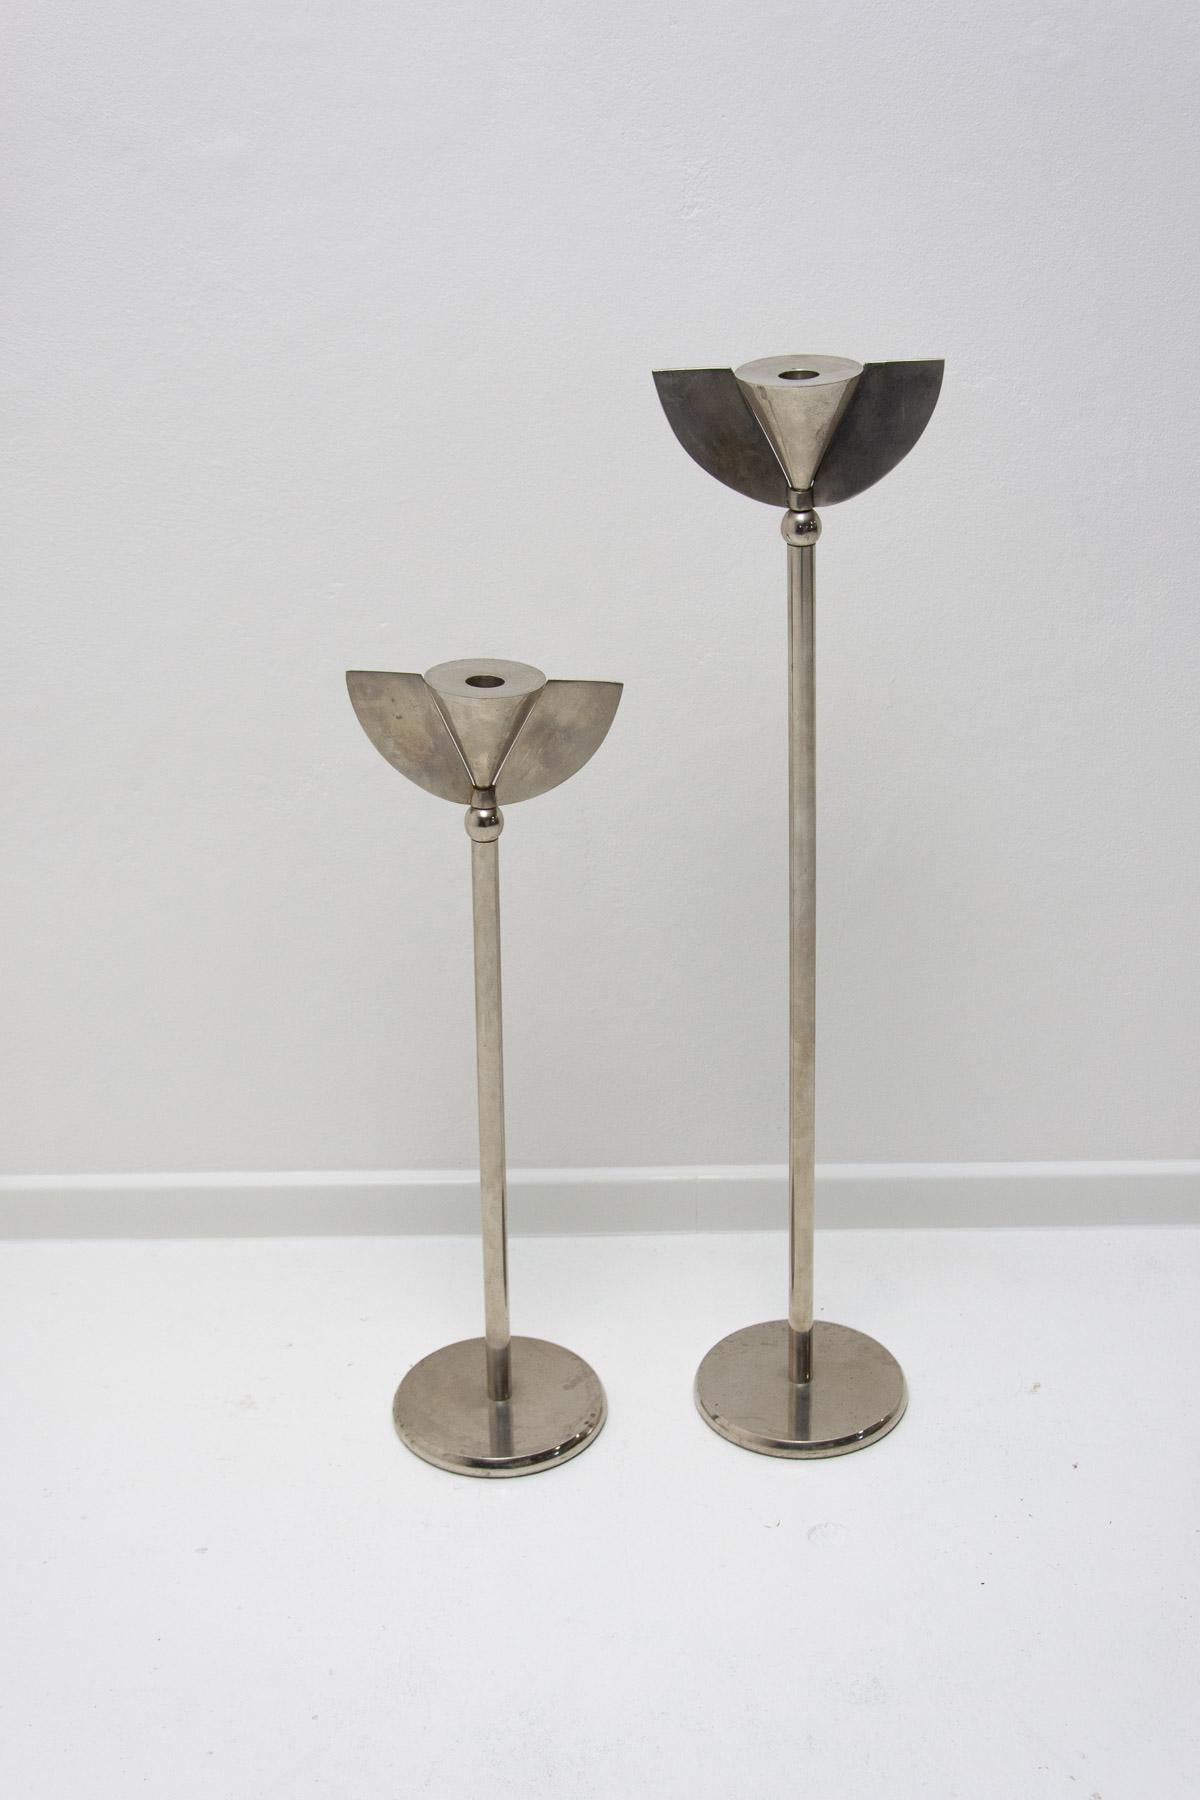 A pair of ART DECO chrome candlesticks from the 1930s. An interesting decorative element for any interior. Made in Central Europe. Very good vintage condition.
Price si for the pair
1) Height: 80 cm

Width: 19 cm

Depth: 16 cm

 

2)